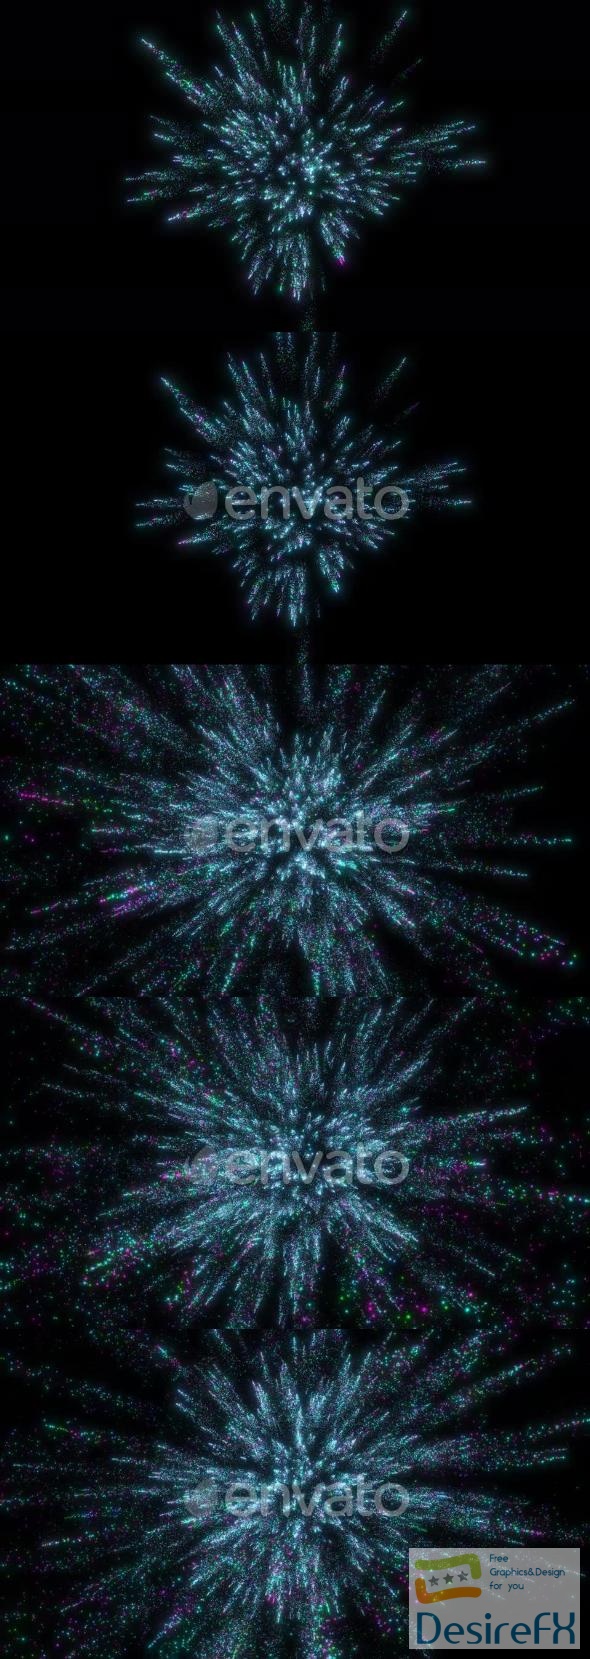 VideoHive Glowing Magic Colorful Particle Brust Animation On Outer Space. Particle Blast On Black Background. 47574828